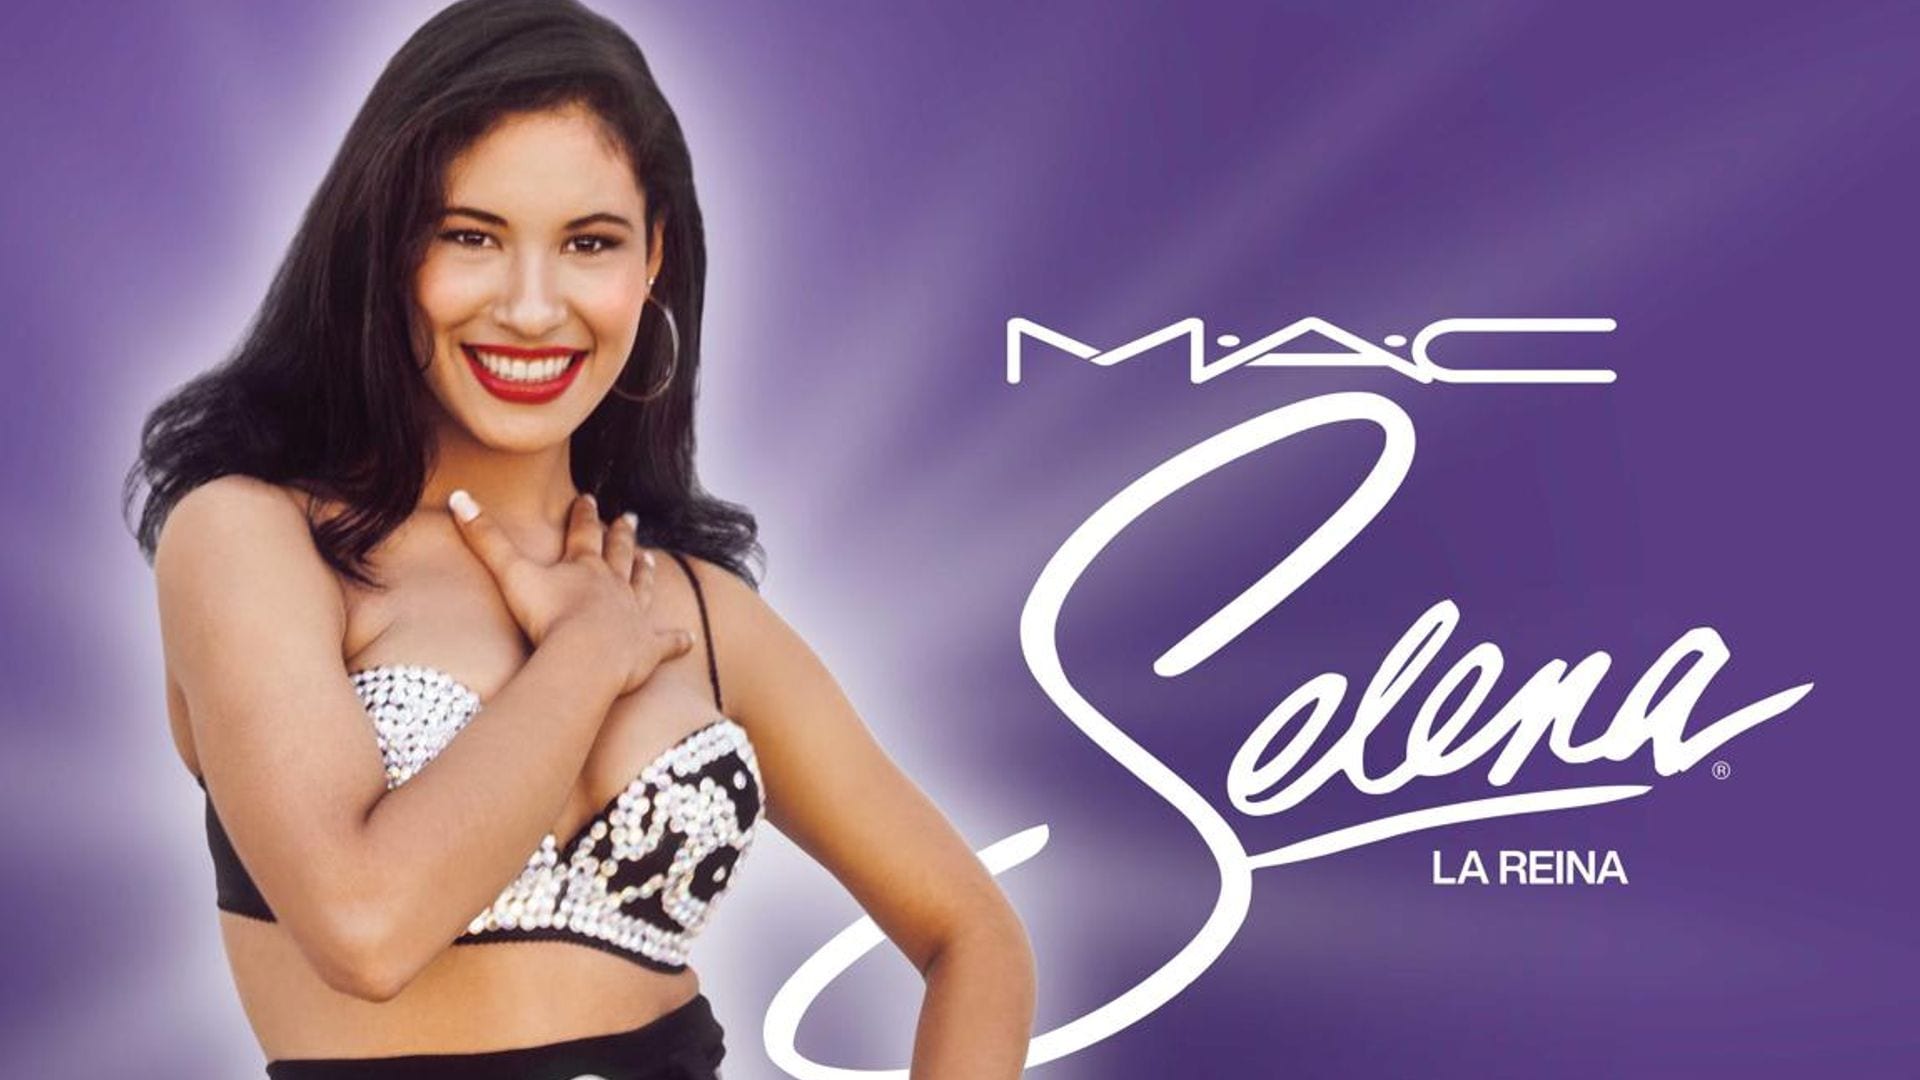 Return of the mack! The new Selena x M.A.C. collection is set to celebrate representation